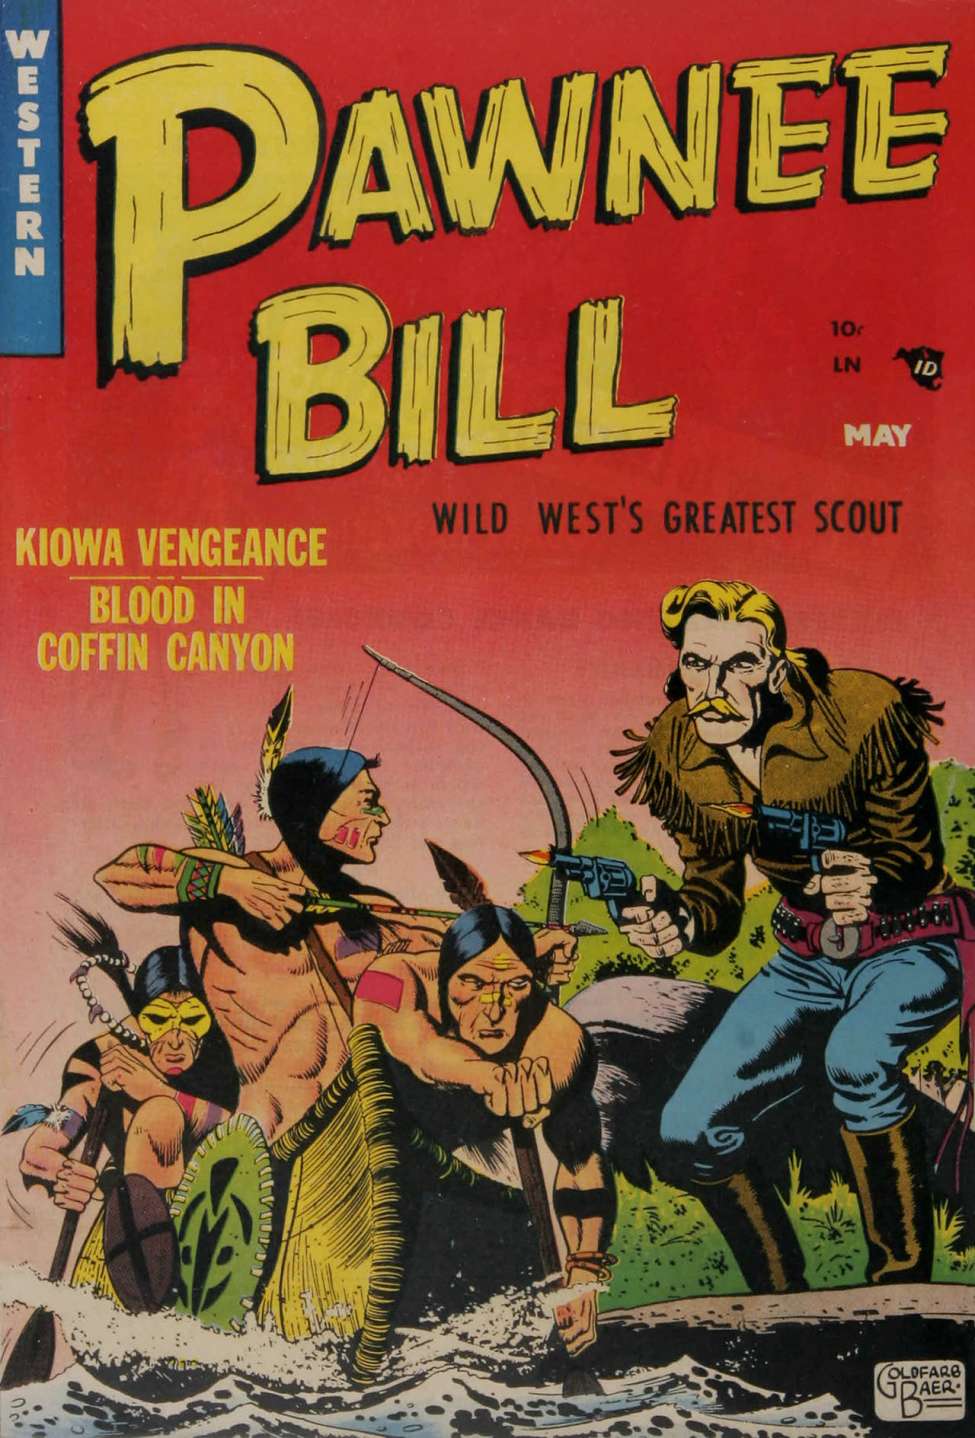 Book Cover For Pawnee Bill 2